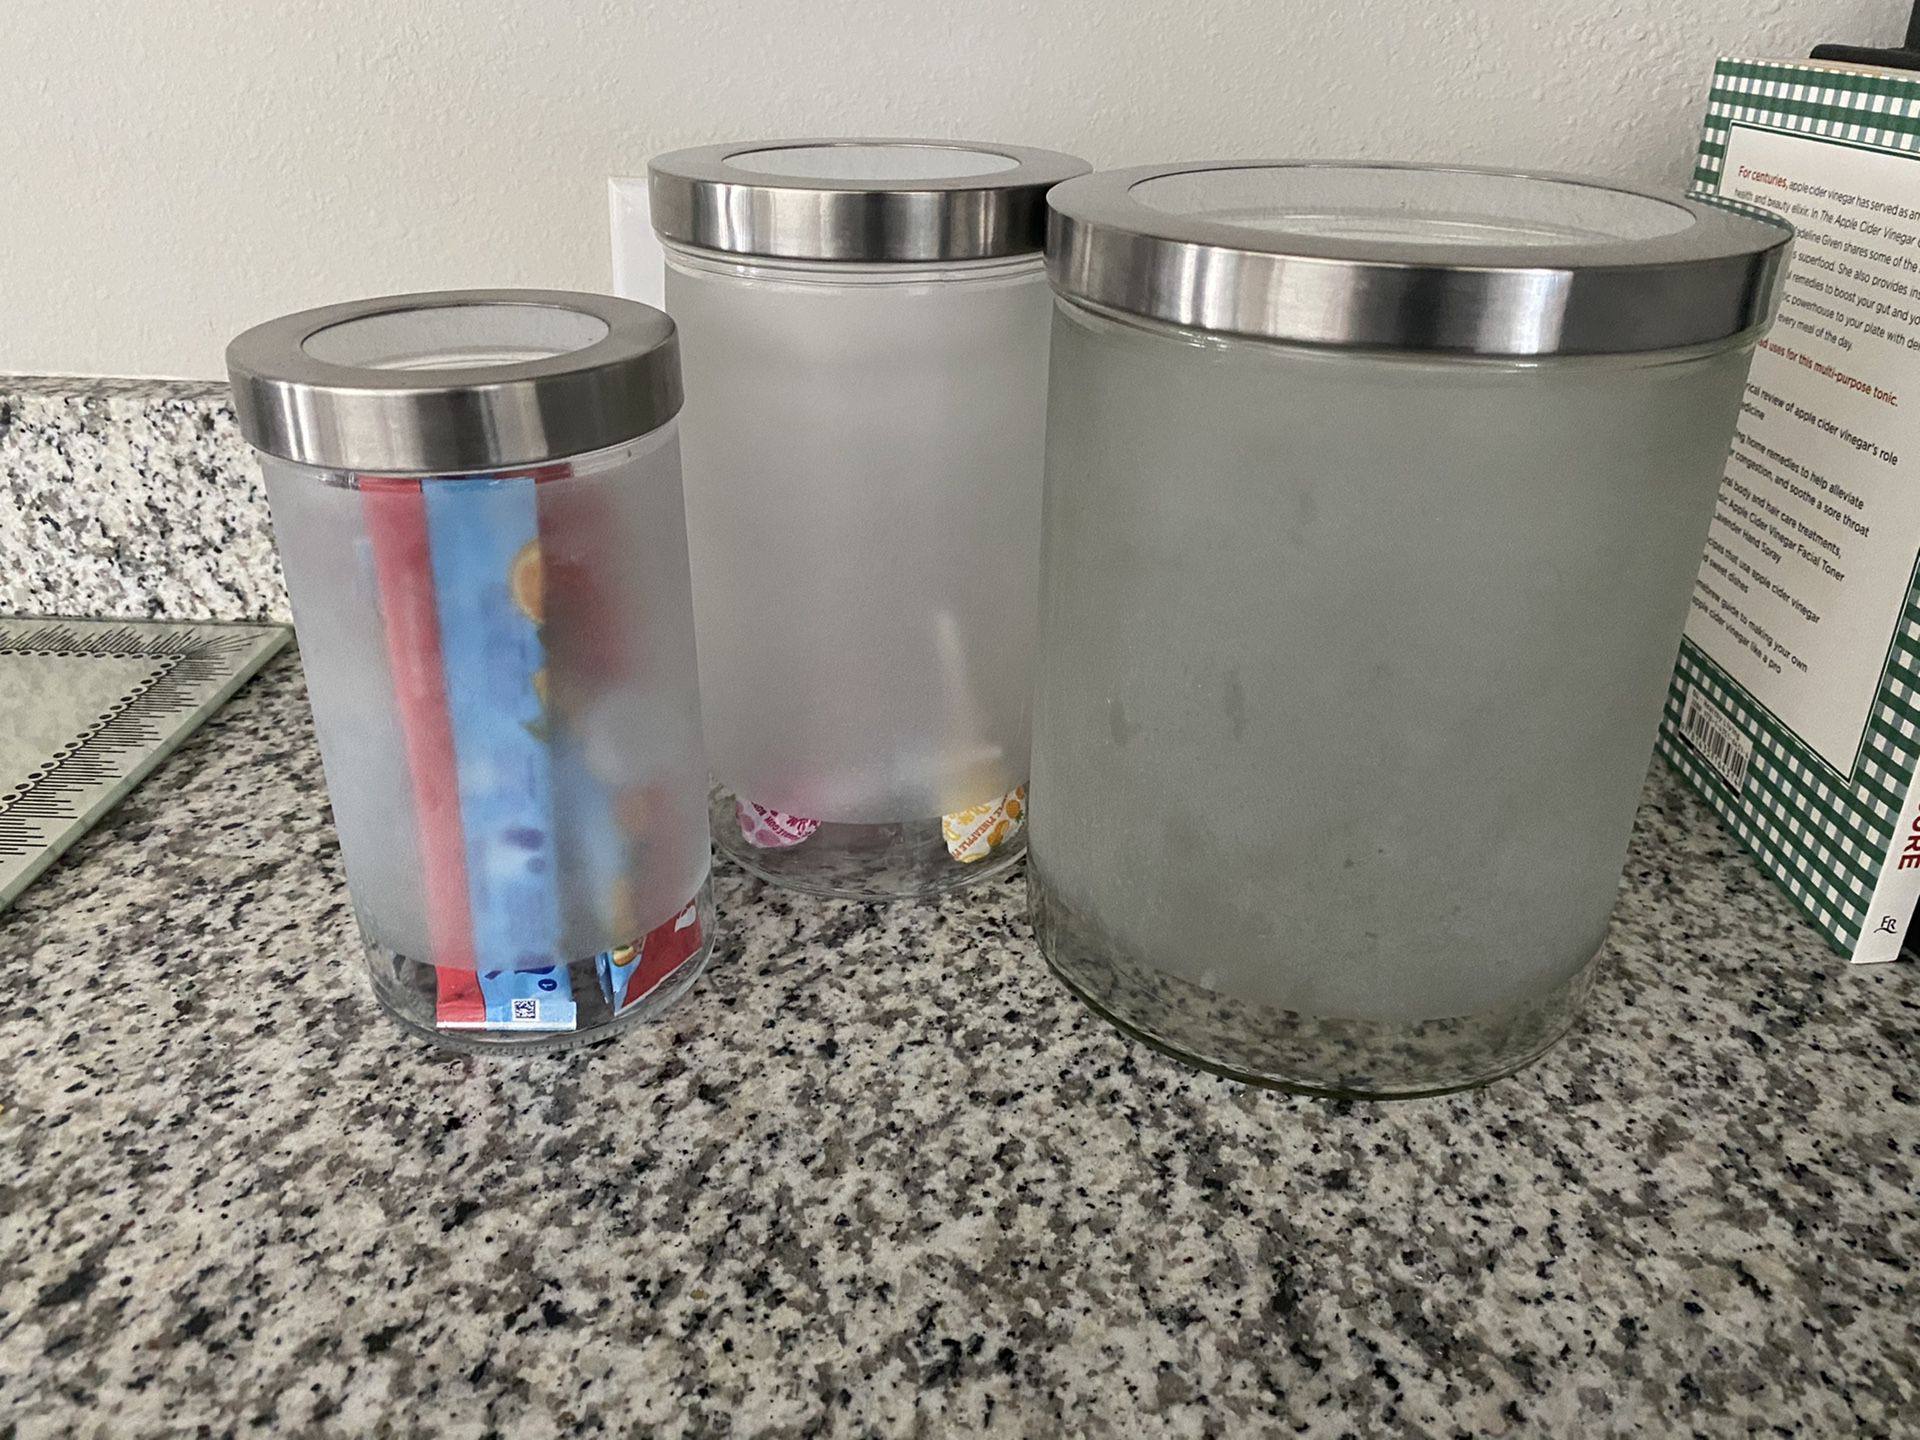 Frosted canisters